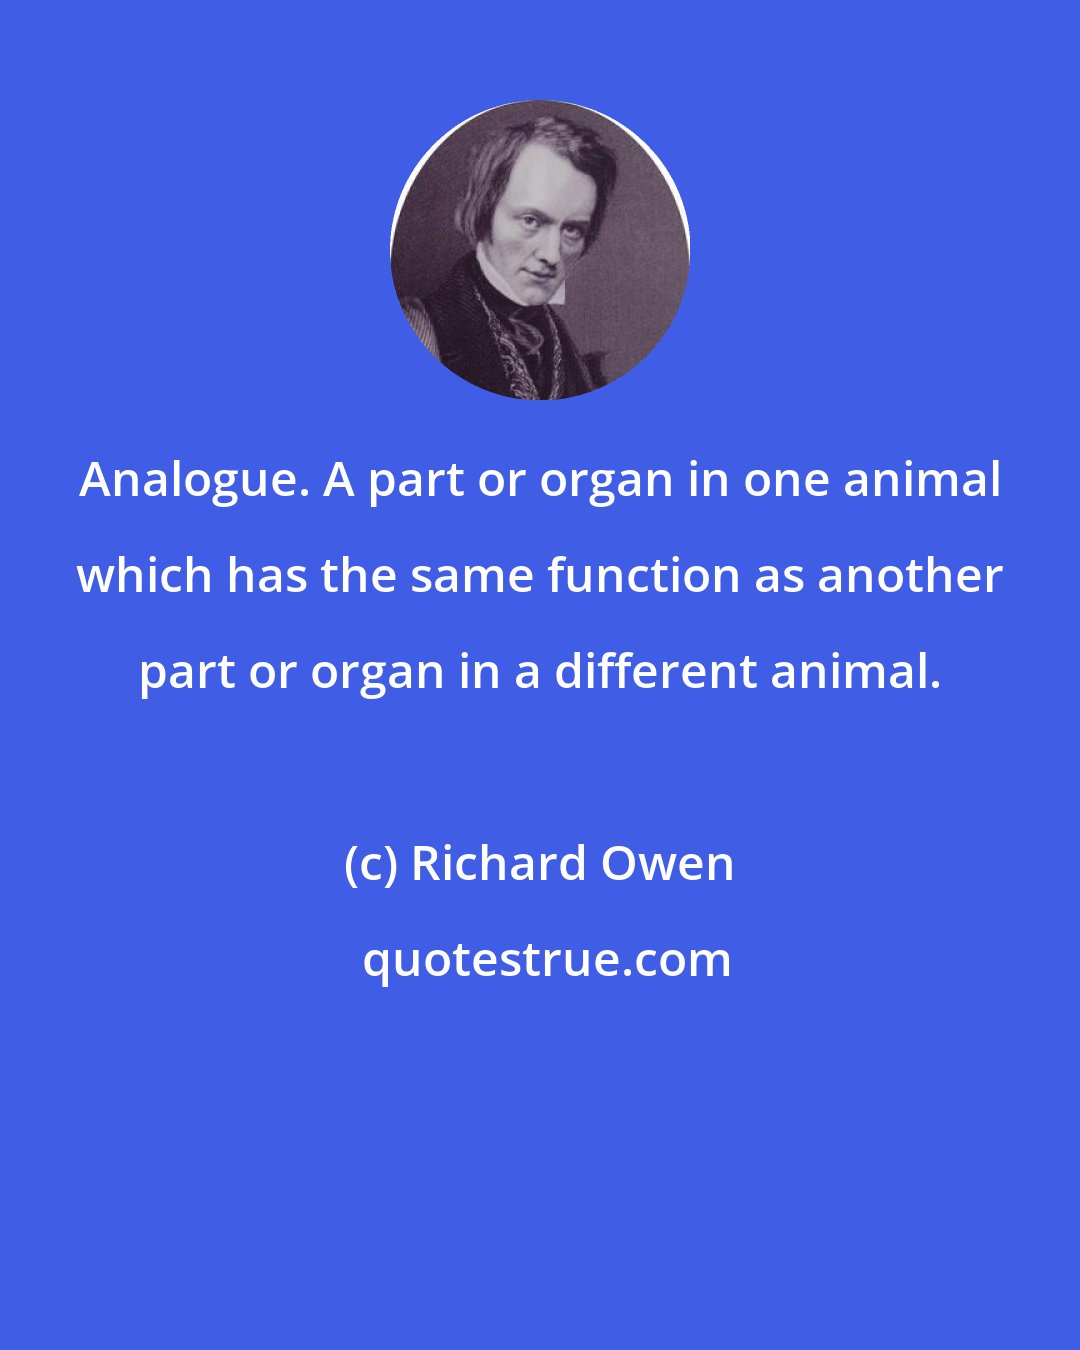 Richard Owen: Analogue. A part or organ in one animal which has the same function as another part or organ in a different animal.